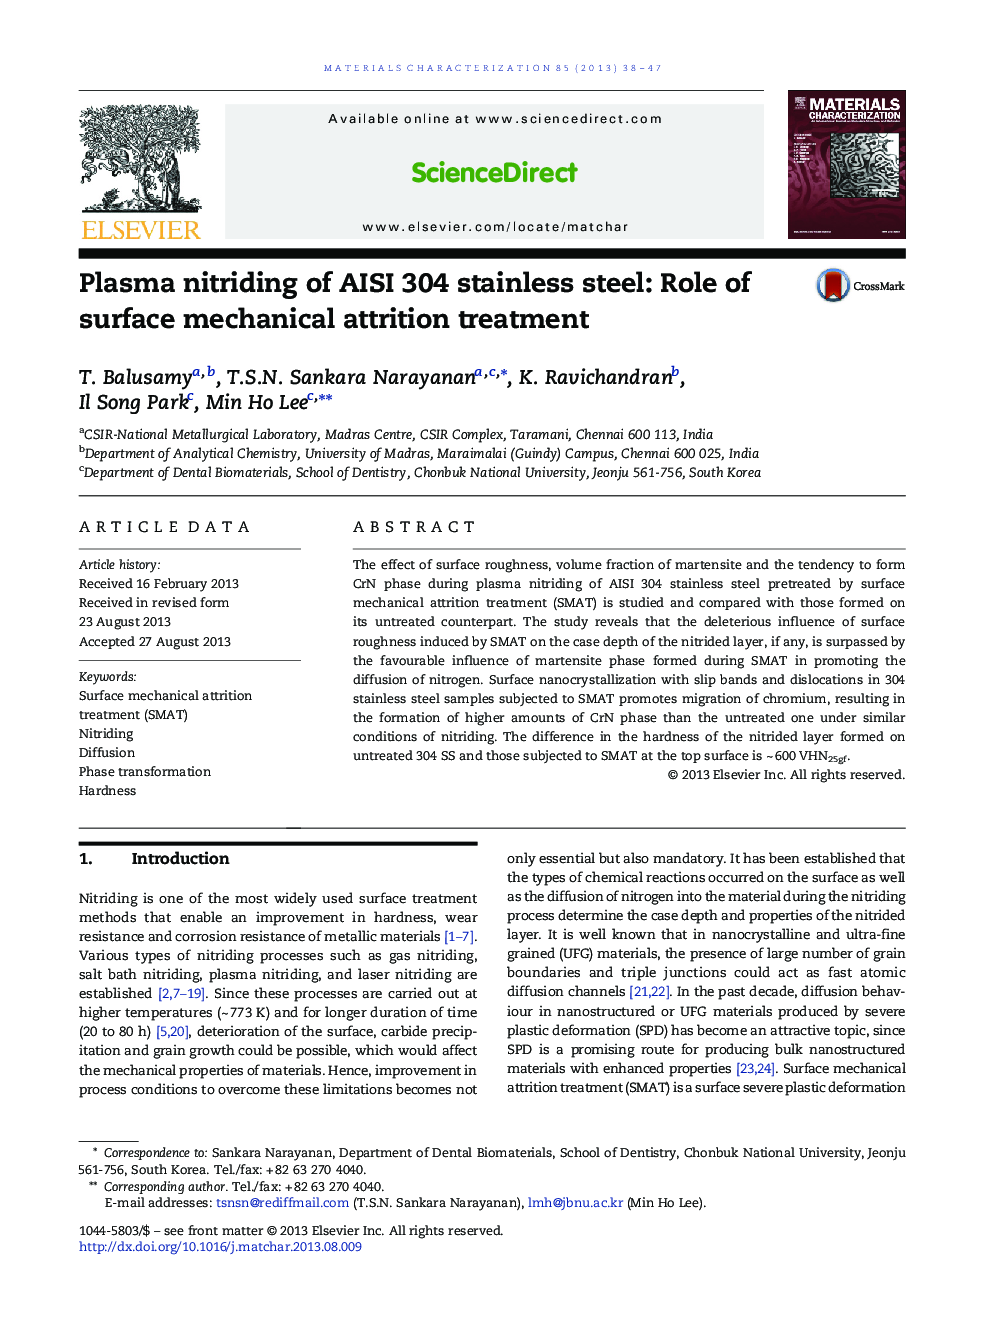 Plasma nitriding of AISI 304 stainless steel: Role of surface mechanical attrition treatment